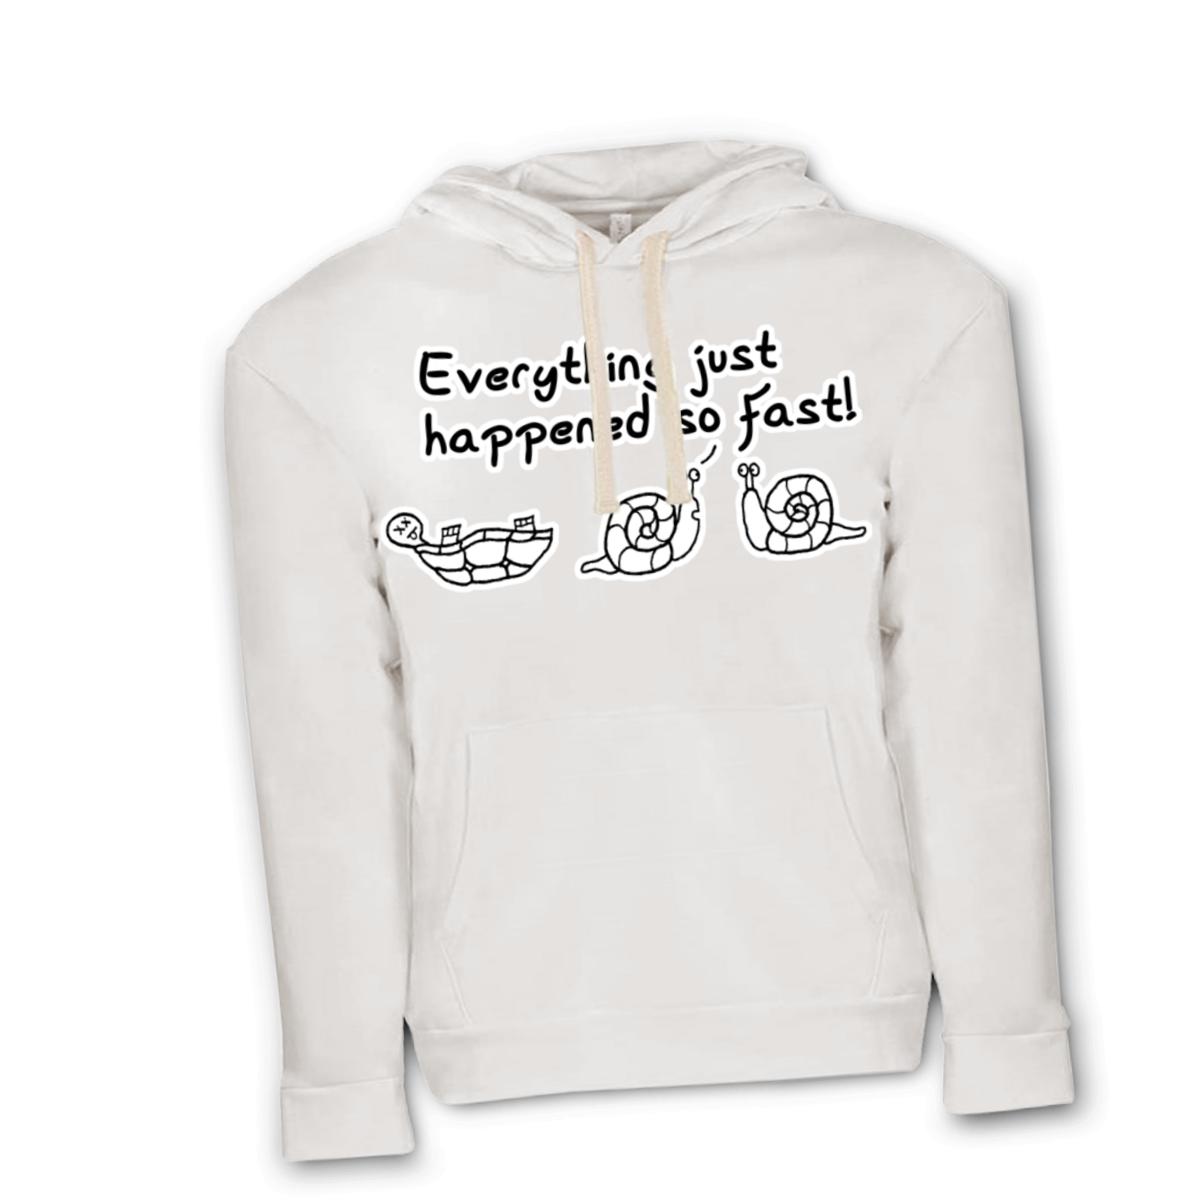 Happened So Fast Unisex Pullover Hoodie Small white